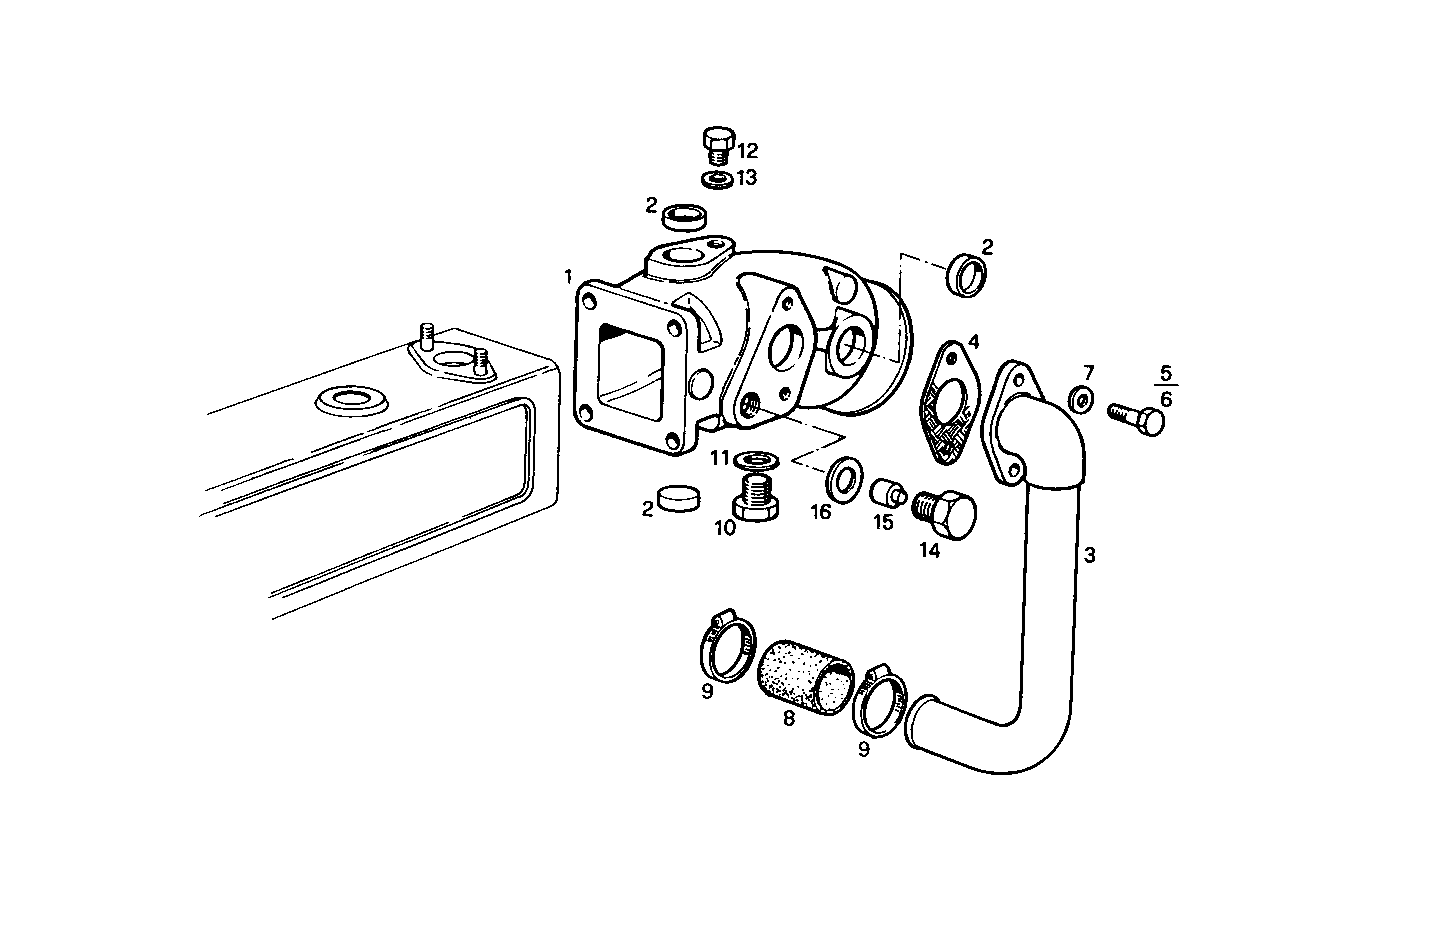 GAS-WATER MIXER WITH STERN OUTLET